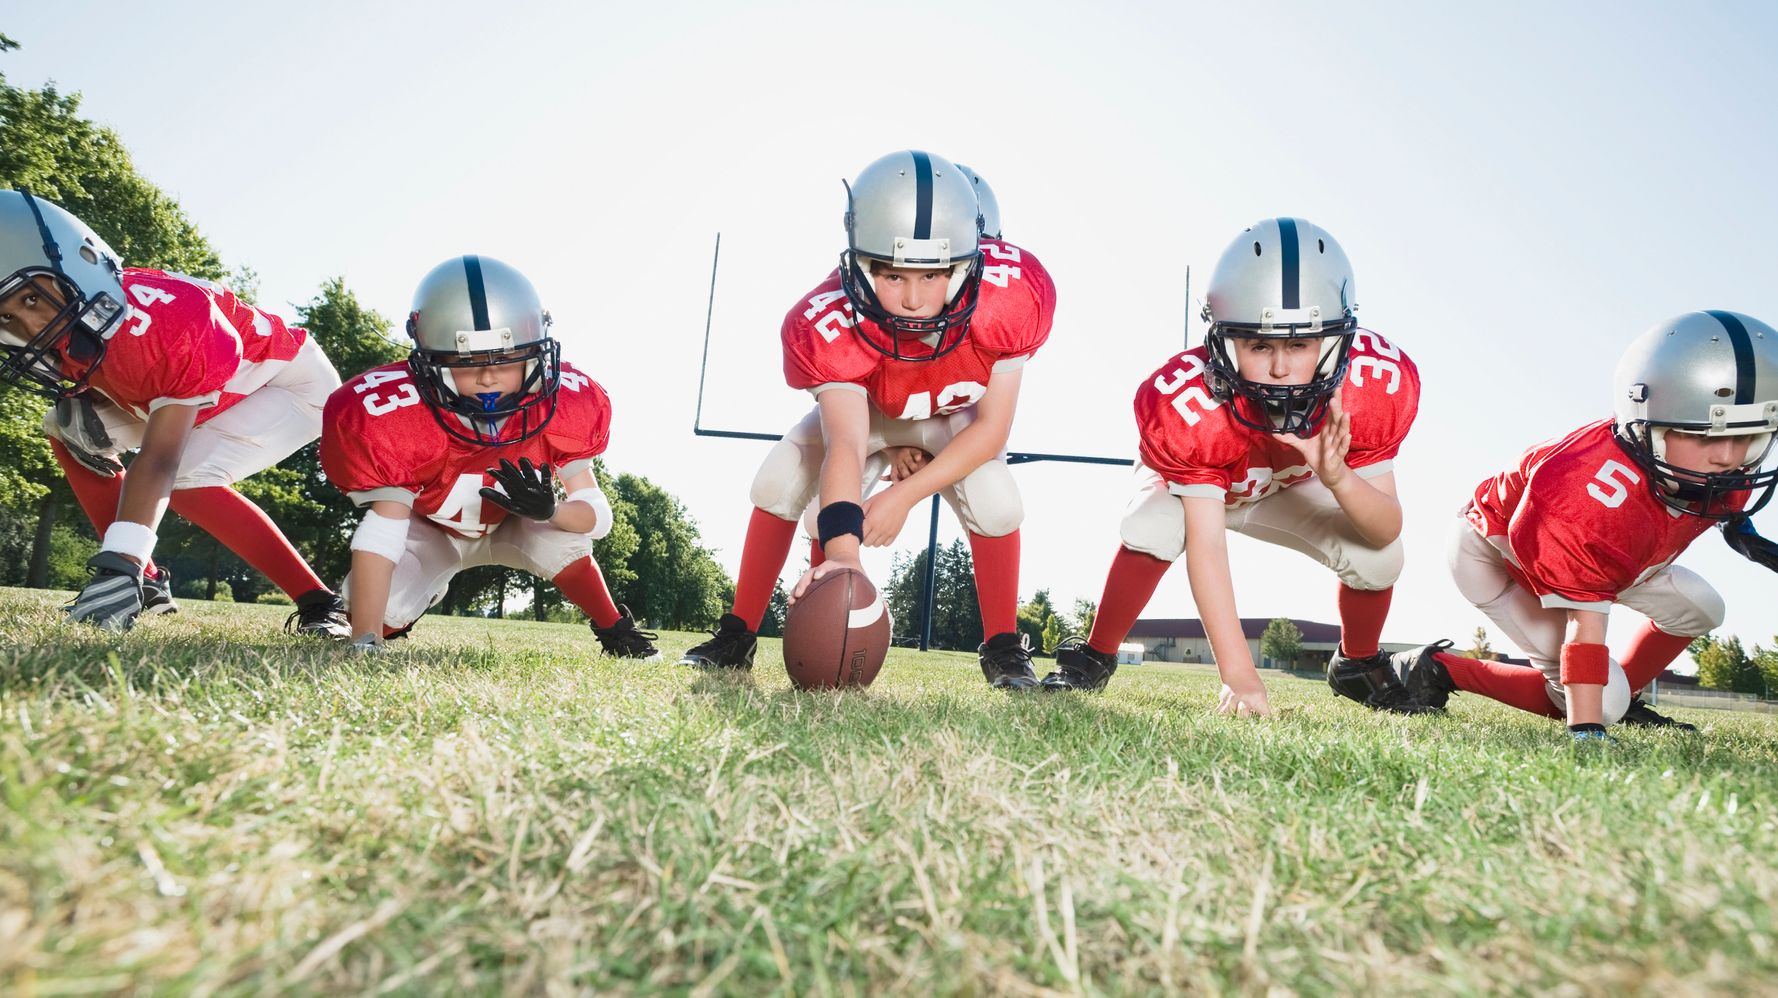 It's Time To Ban Youth Tackle Football